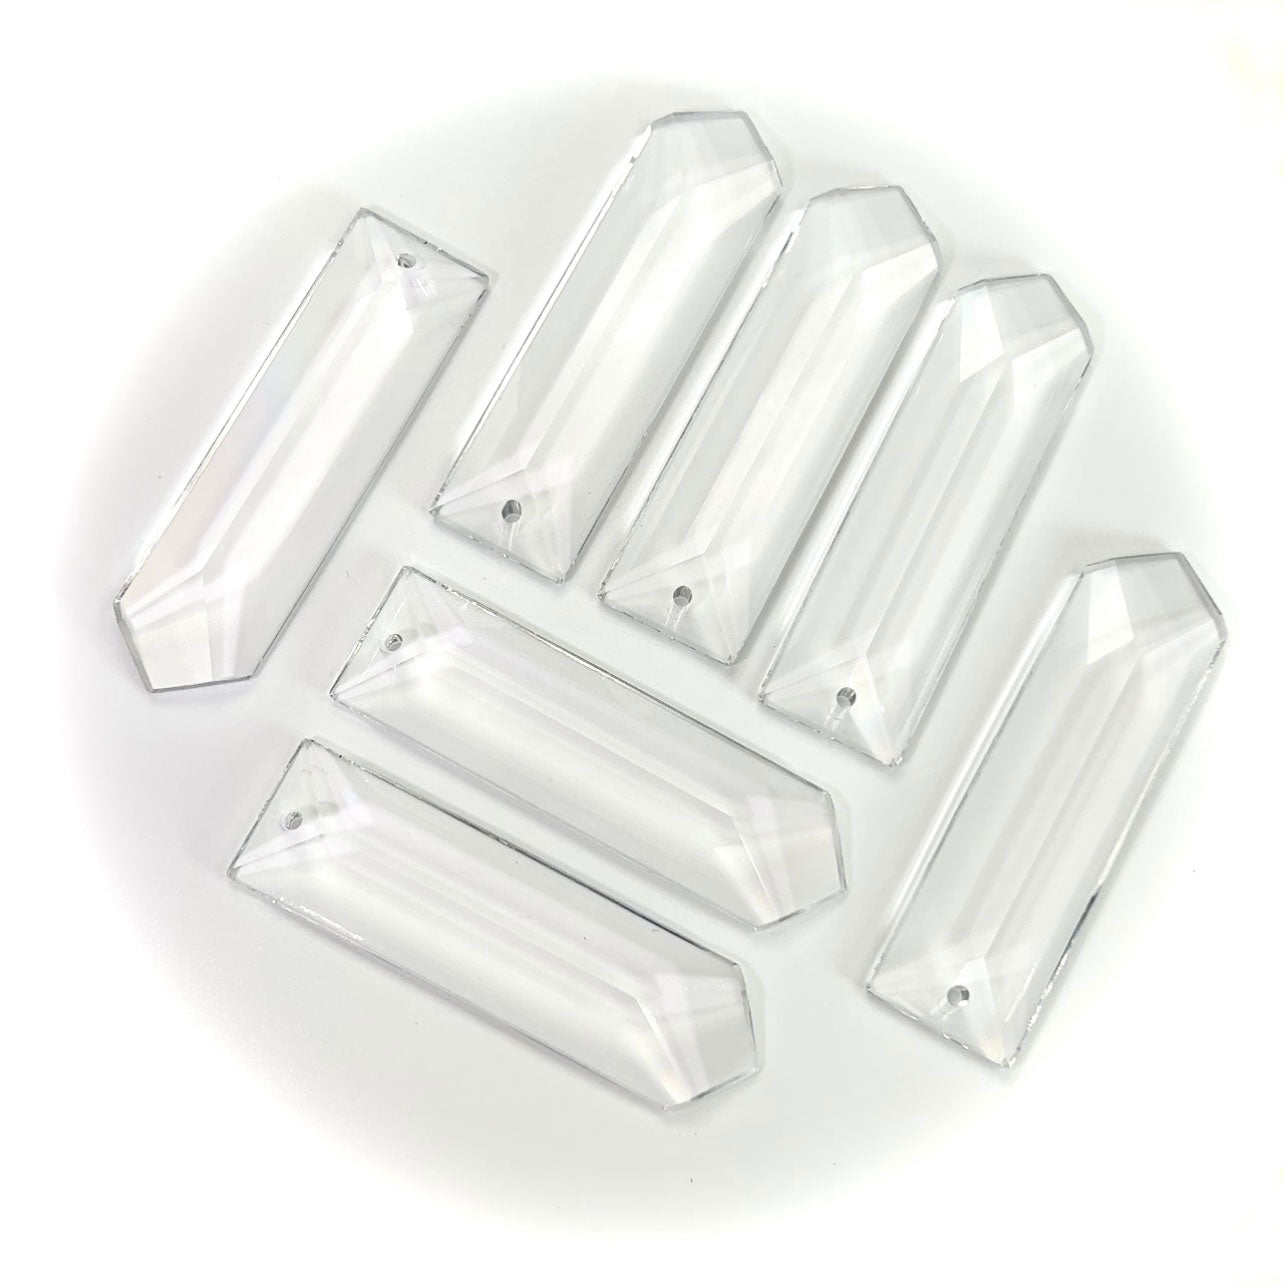 Swarovski Spectra Crystal Components Art.# 8290 - 63x18mm Clear Crystal 1-Hole Colonial 2.5inch x-Prism SW072